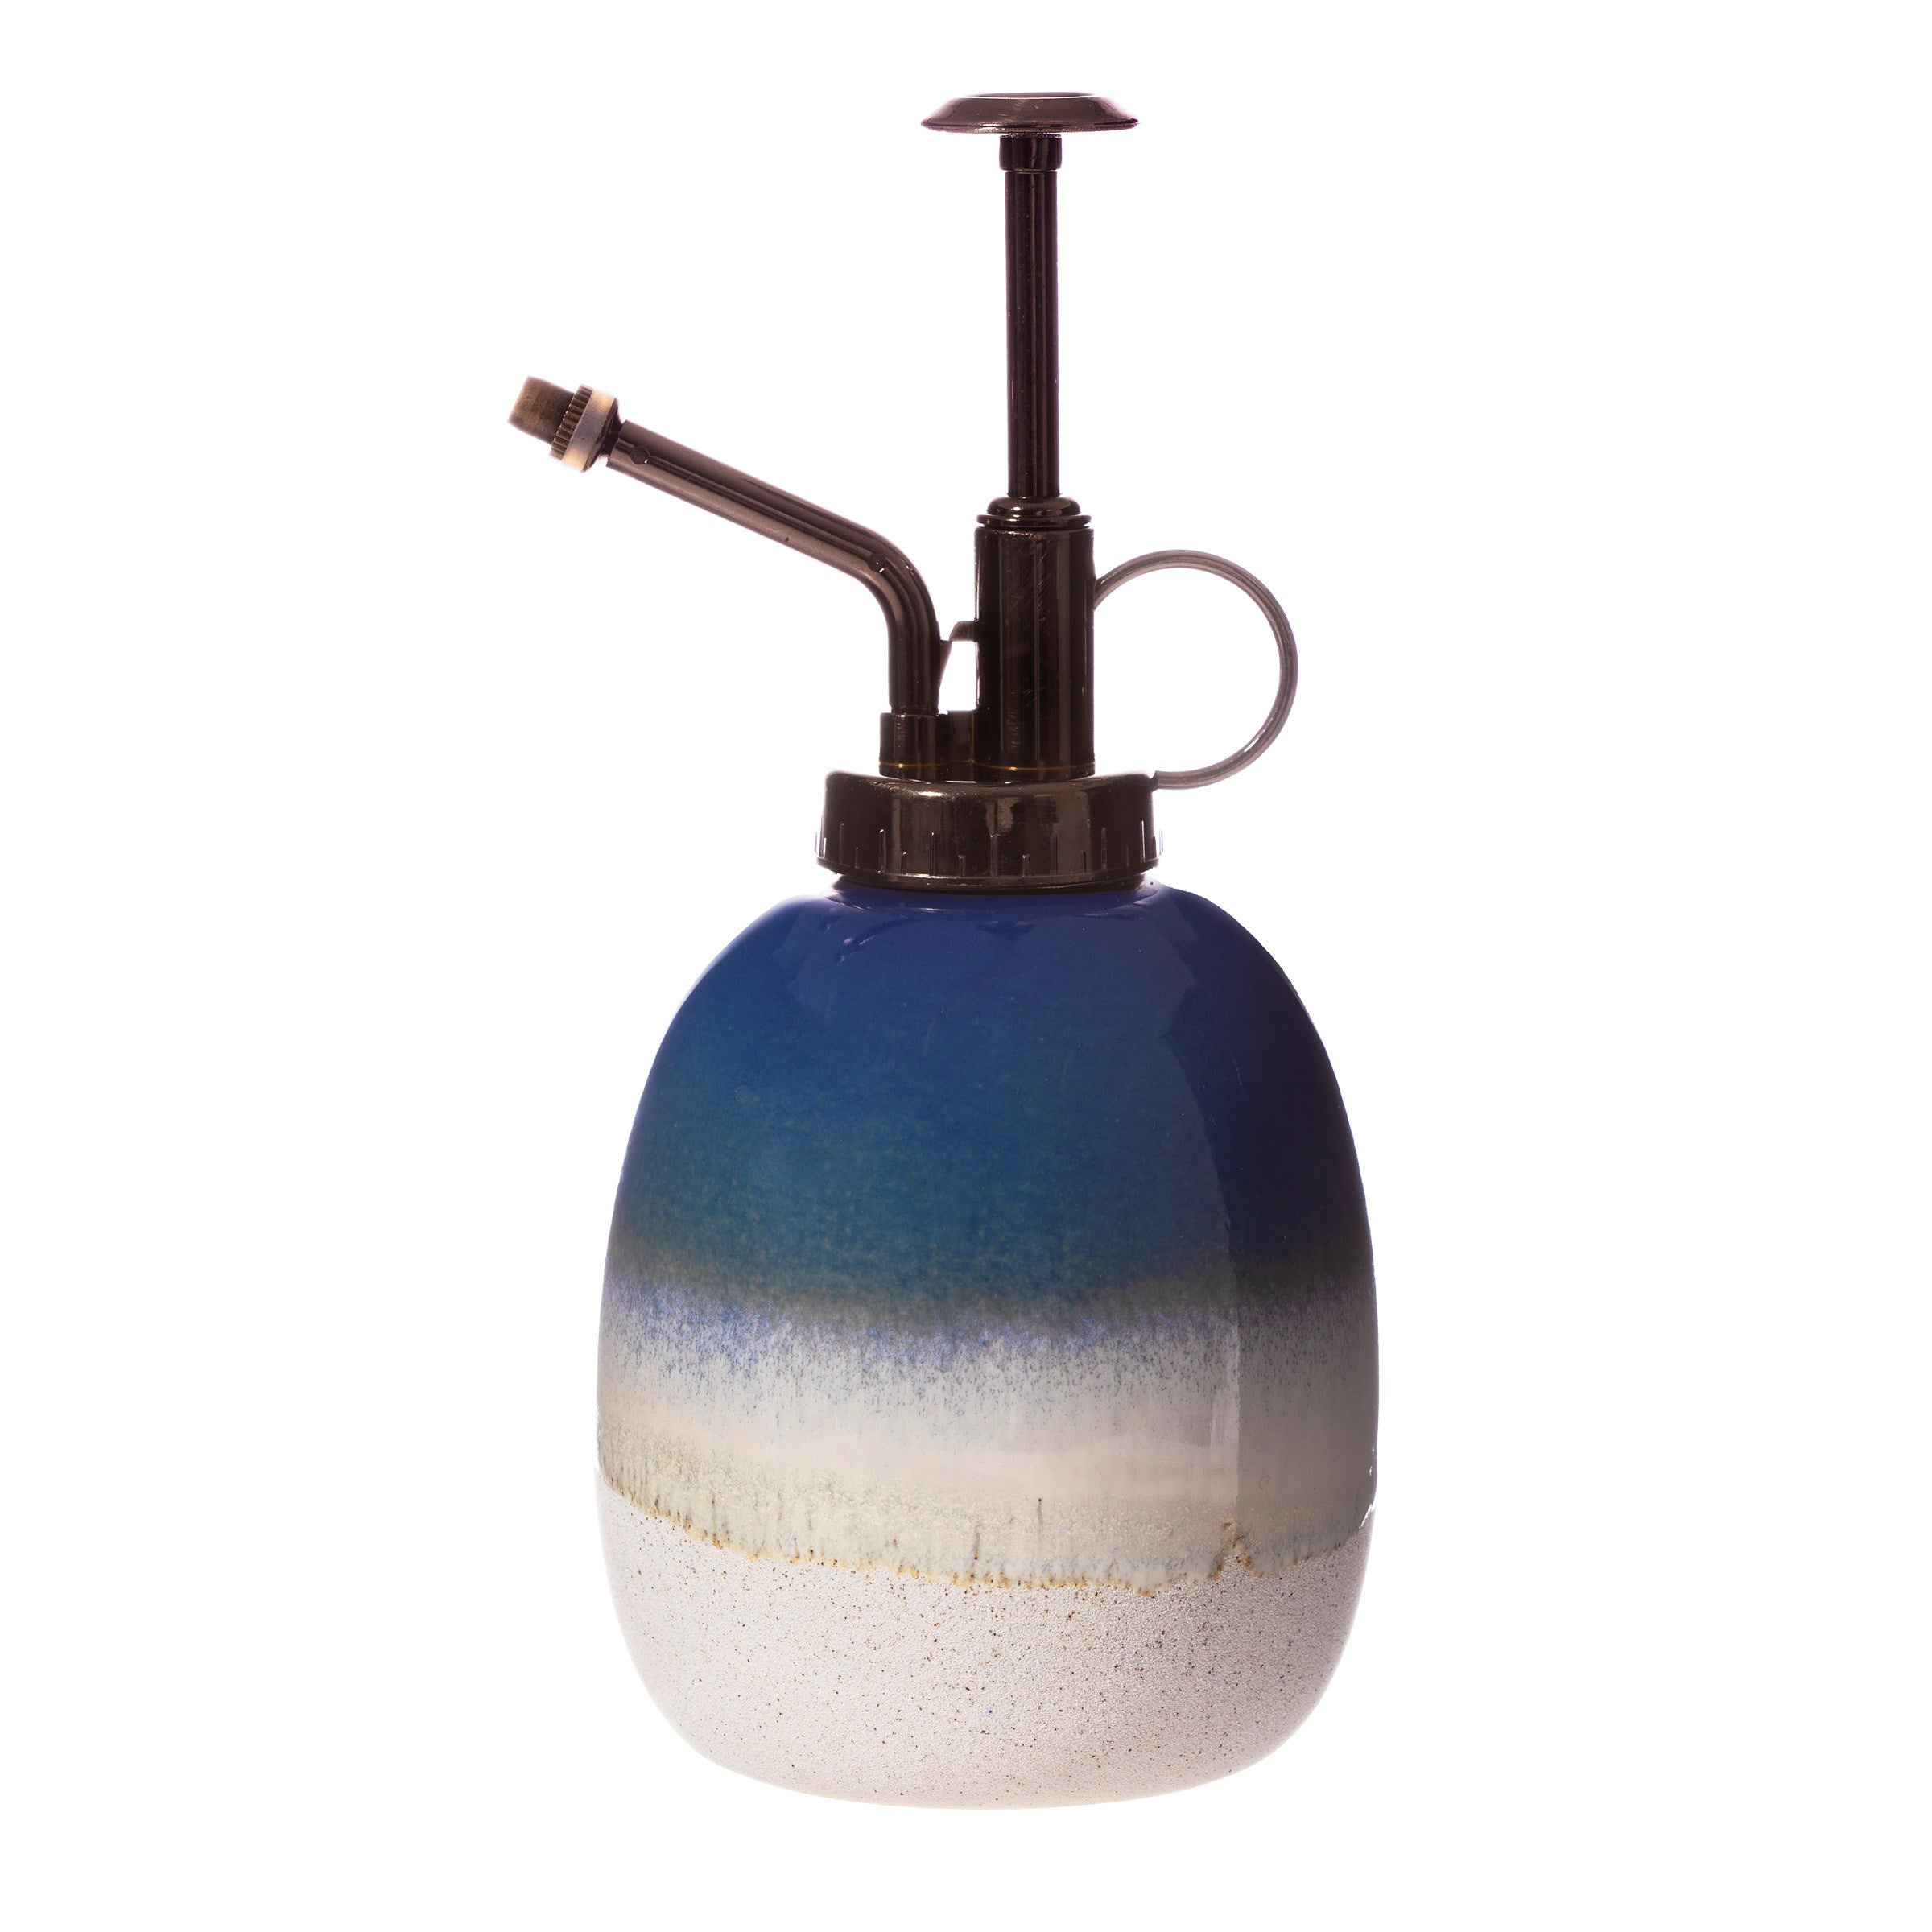 Mojave Glazed Stoneware Plant Mister in a choice of colours